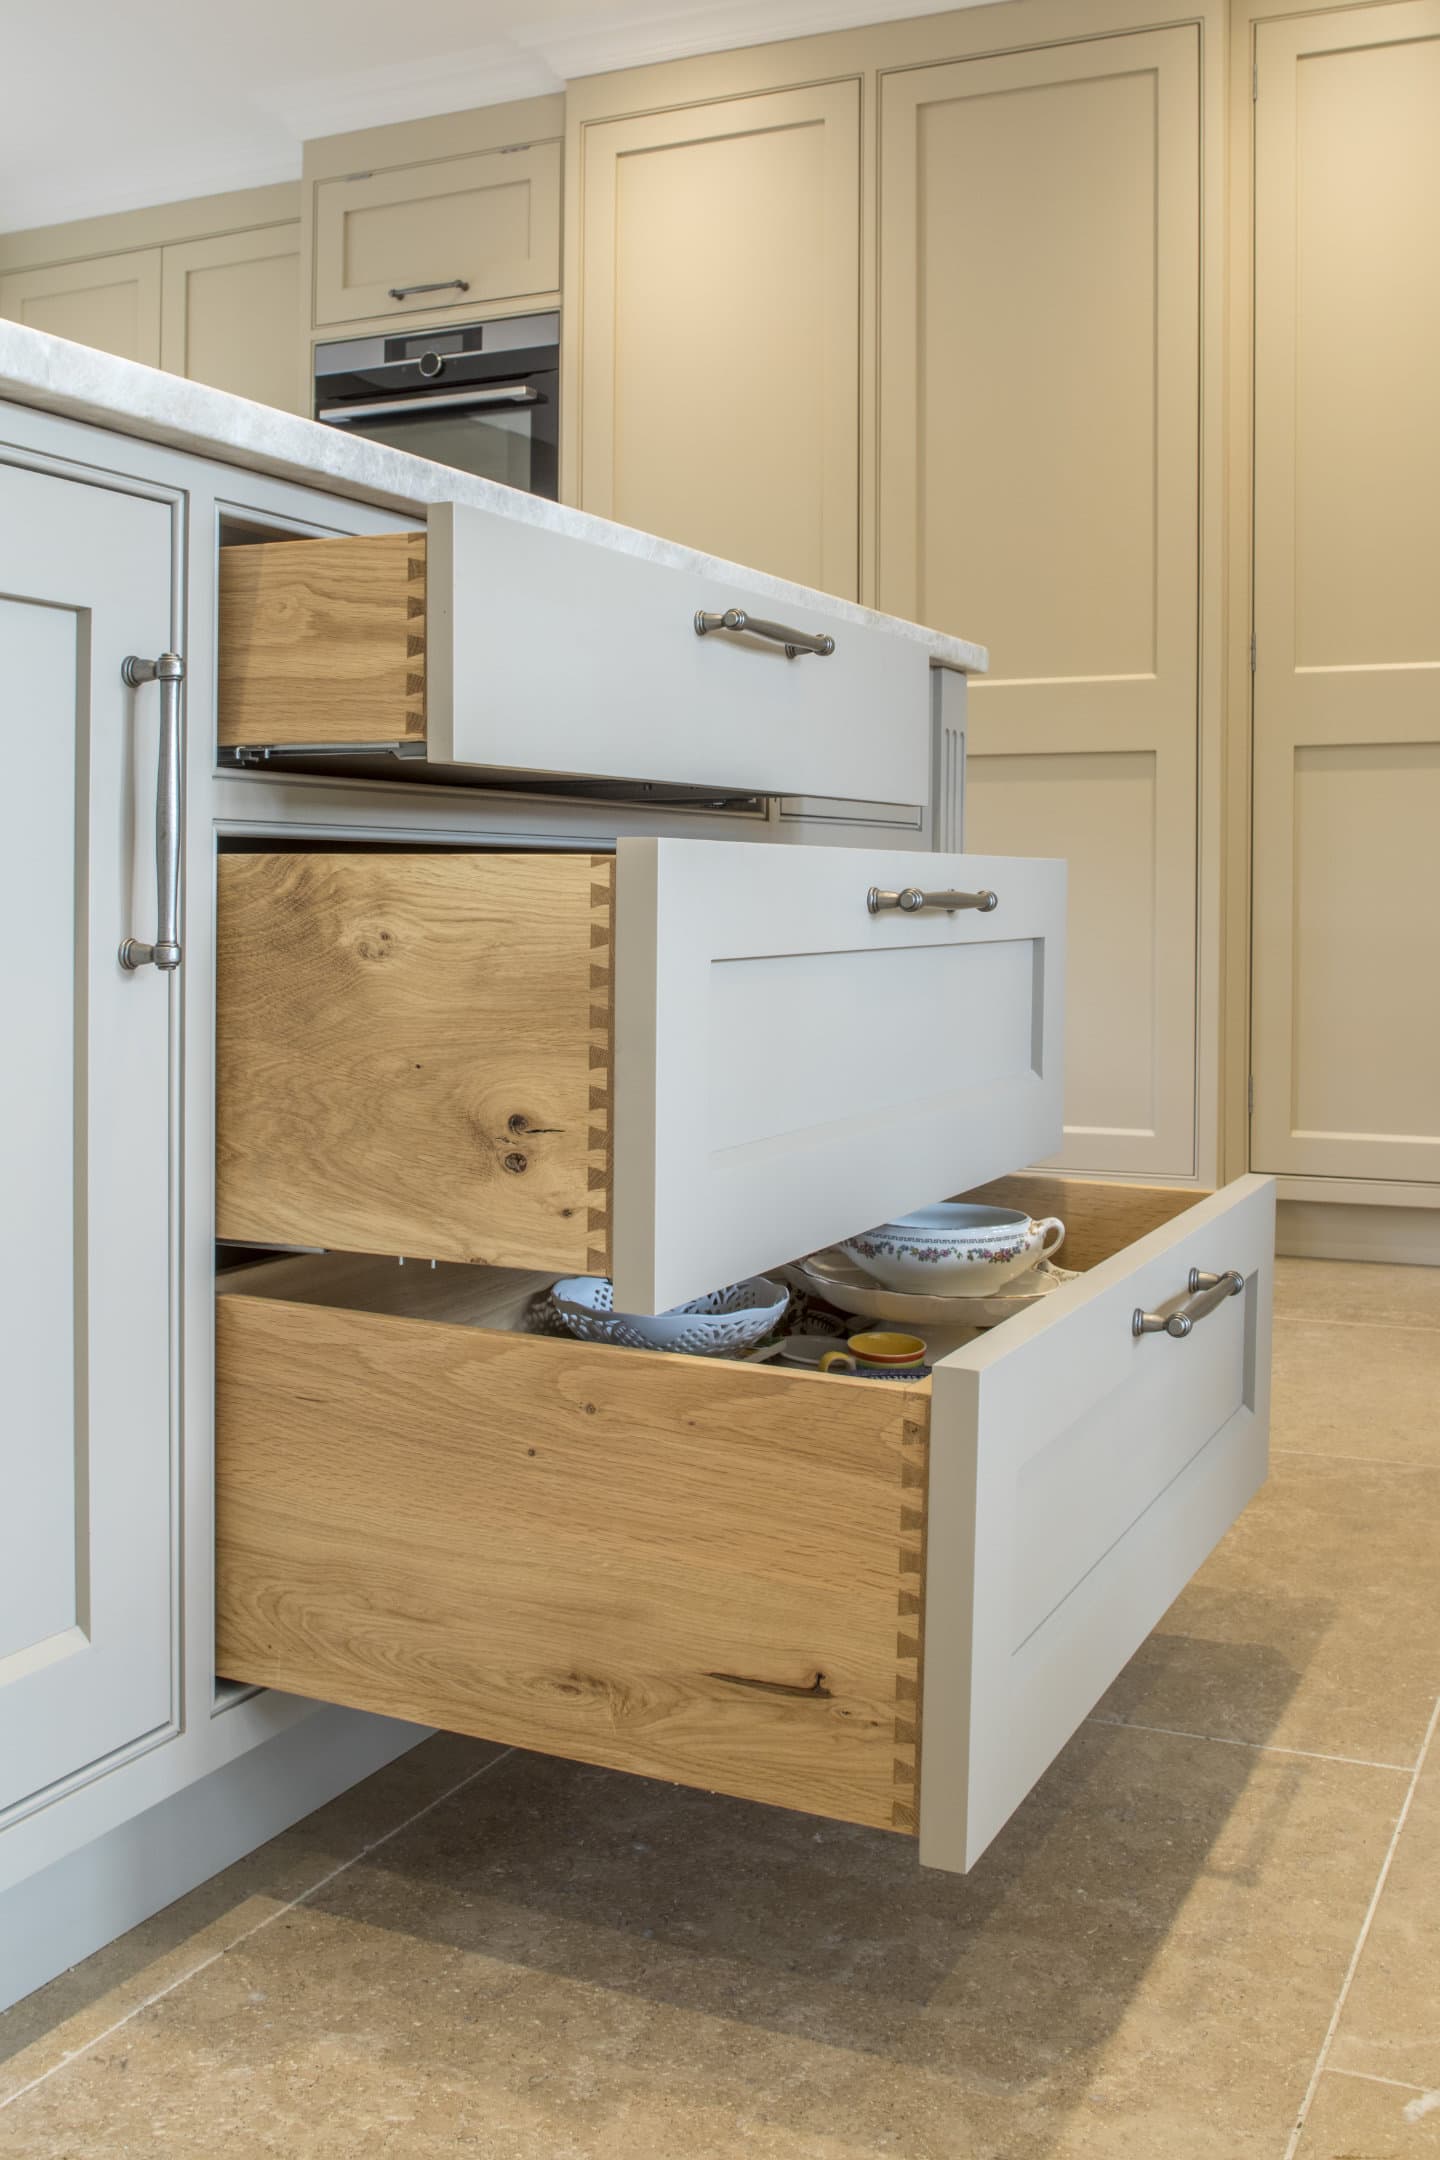 A set of three kitchen drawers opened to different lengths